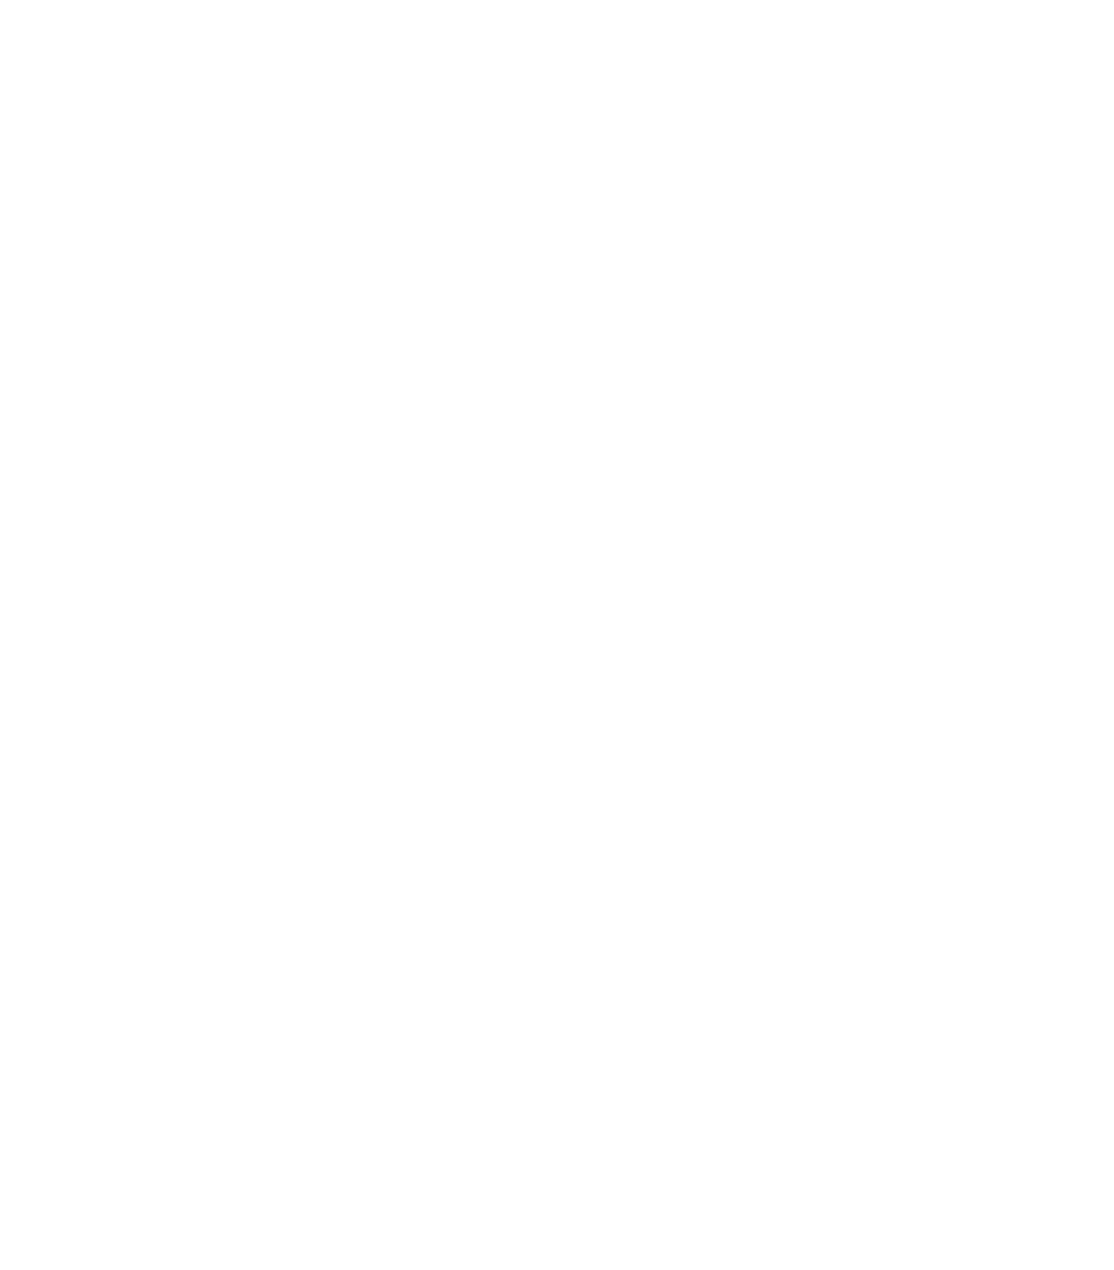 07_casino-holdem-logo-3-rows-fill-only_casinoholdem.png thumbnail